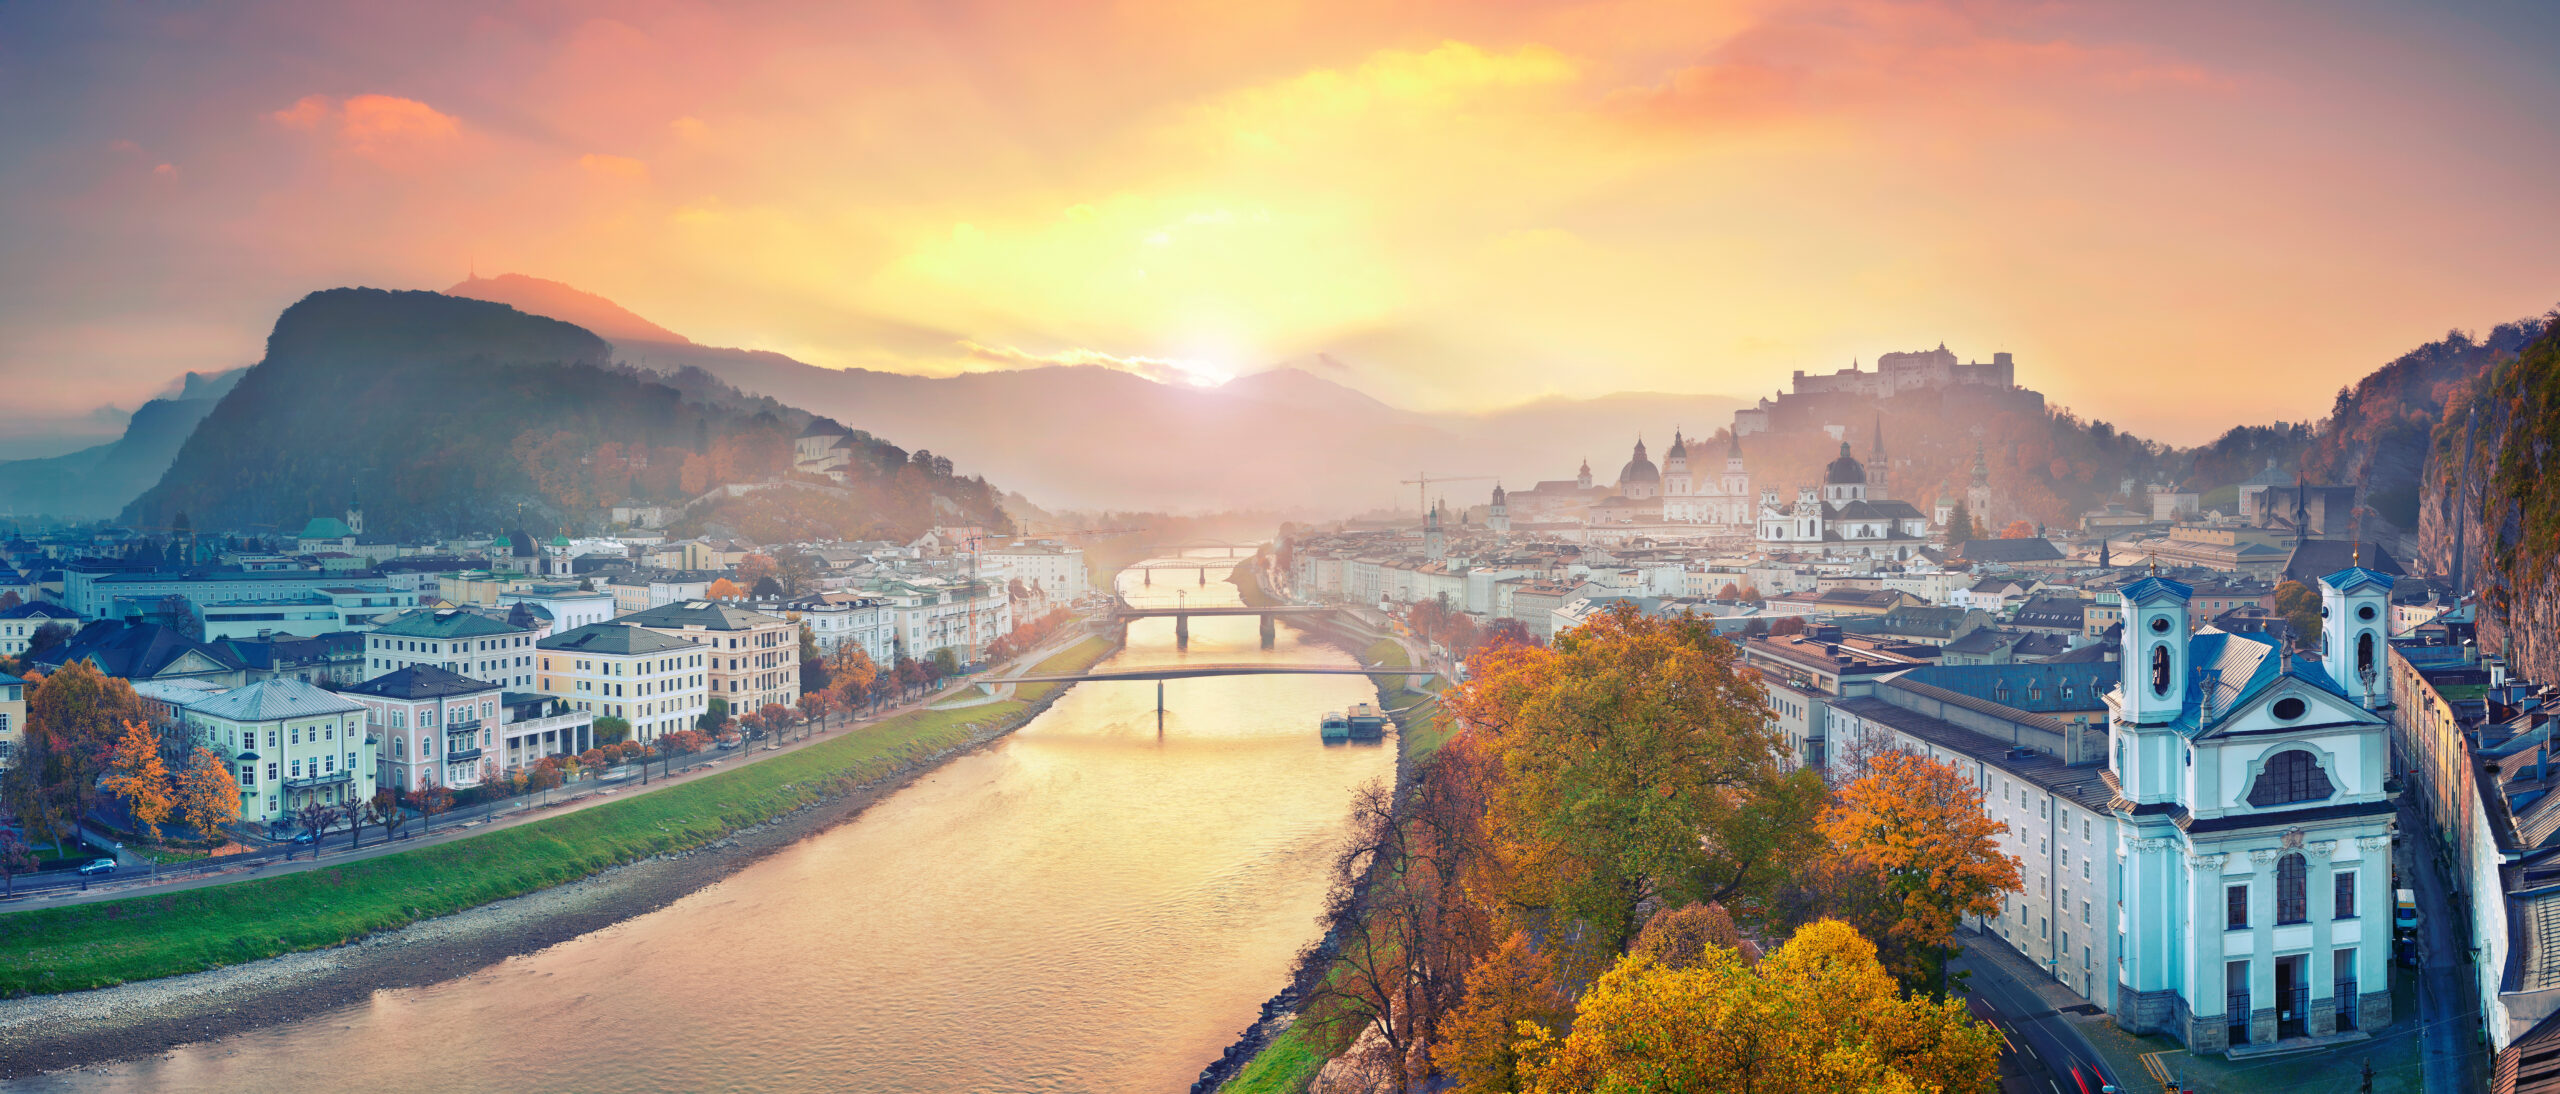 Panoramic image of town along river during autumn.